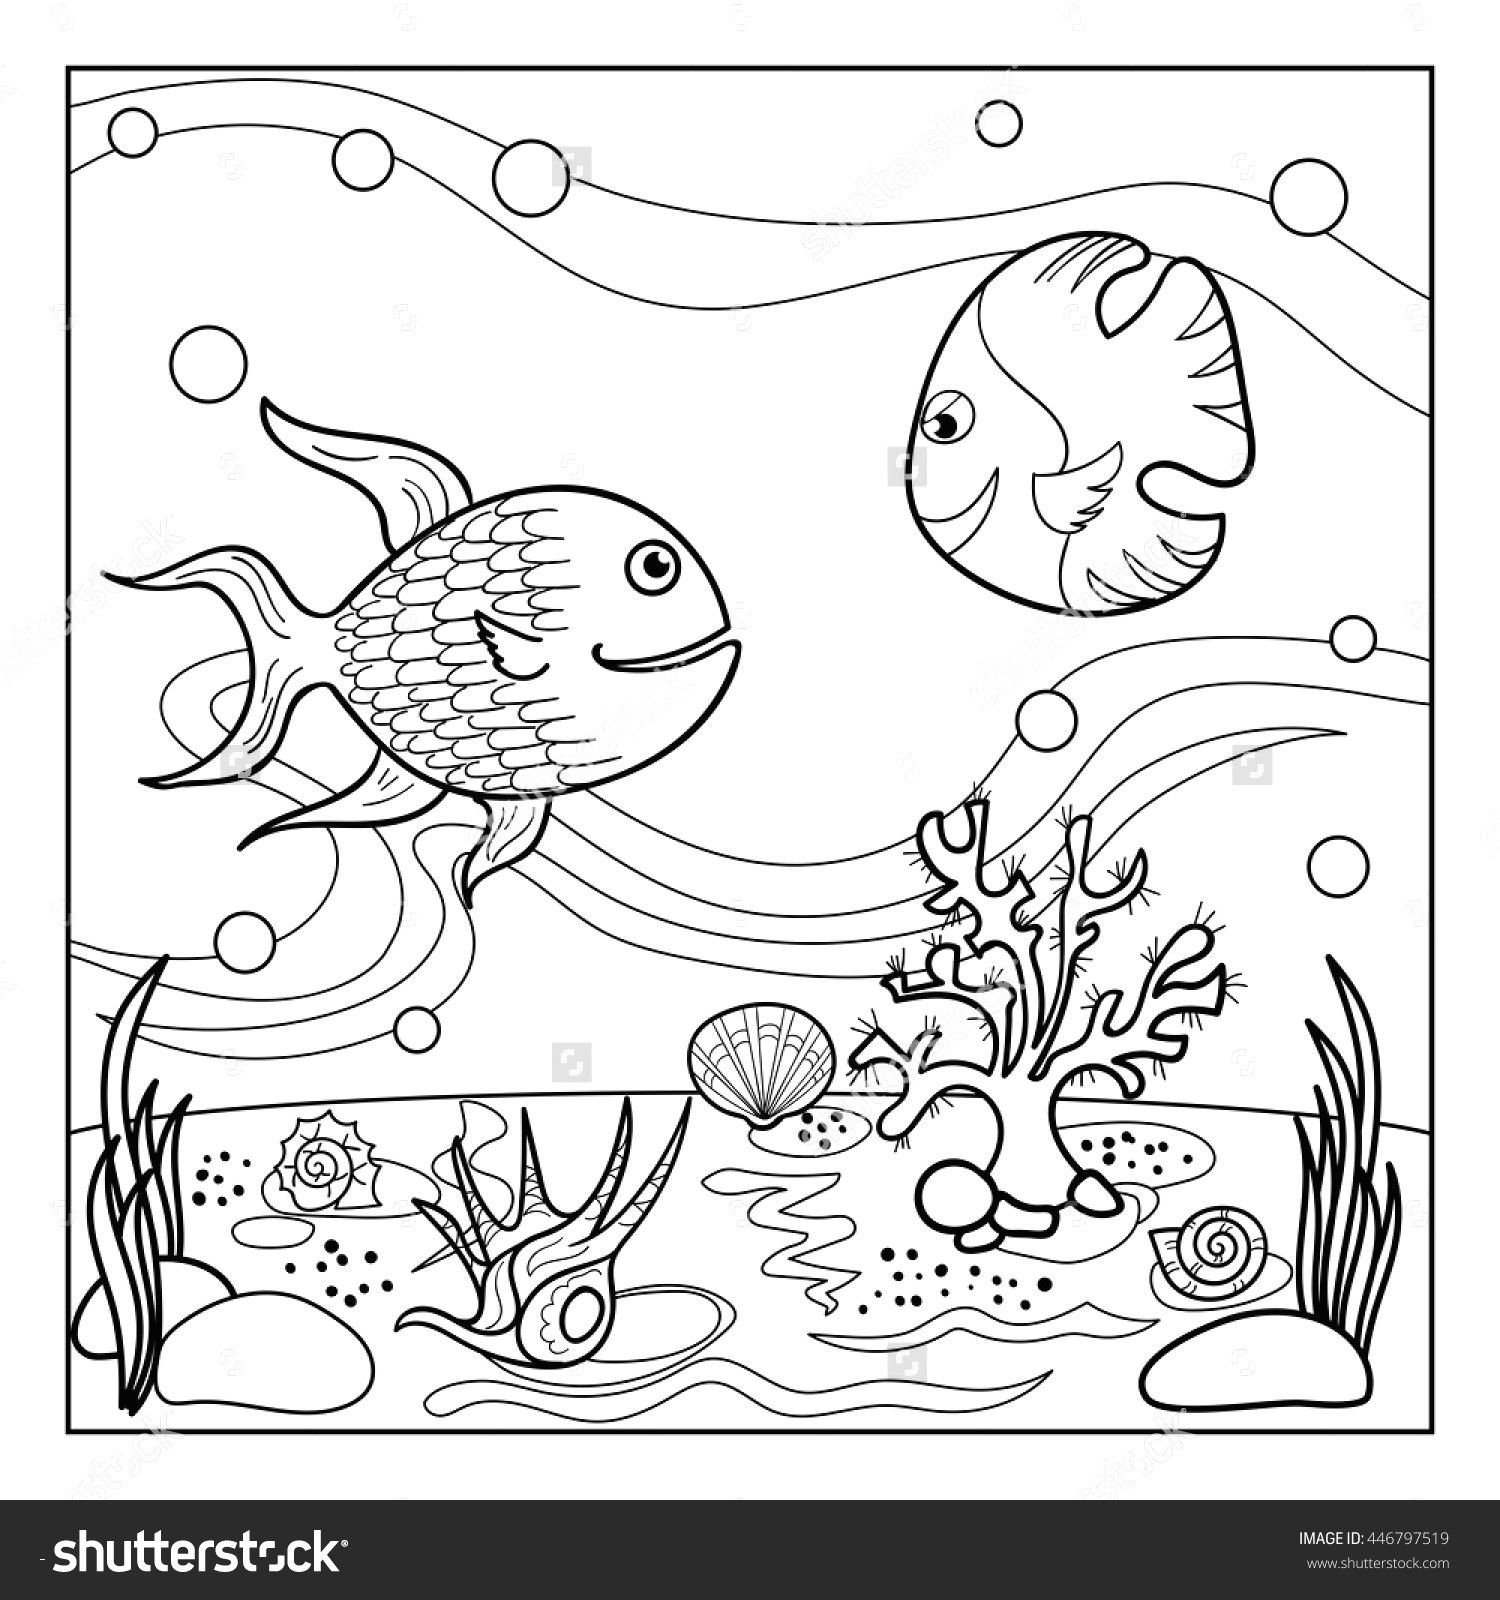 Drawing A Eye Easy Easy to Draw Feather Feather Coloring Page Fresh Home Coloring Pages